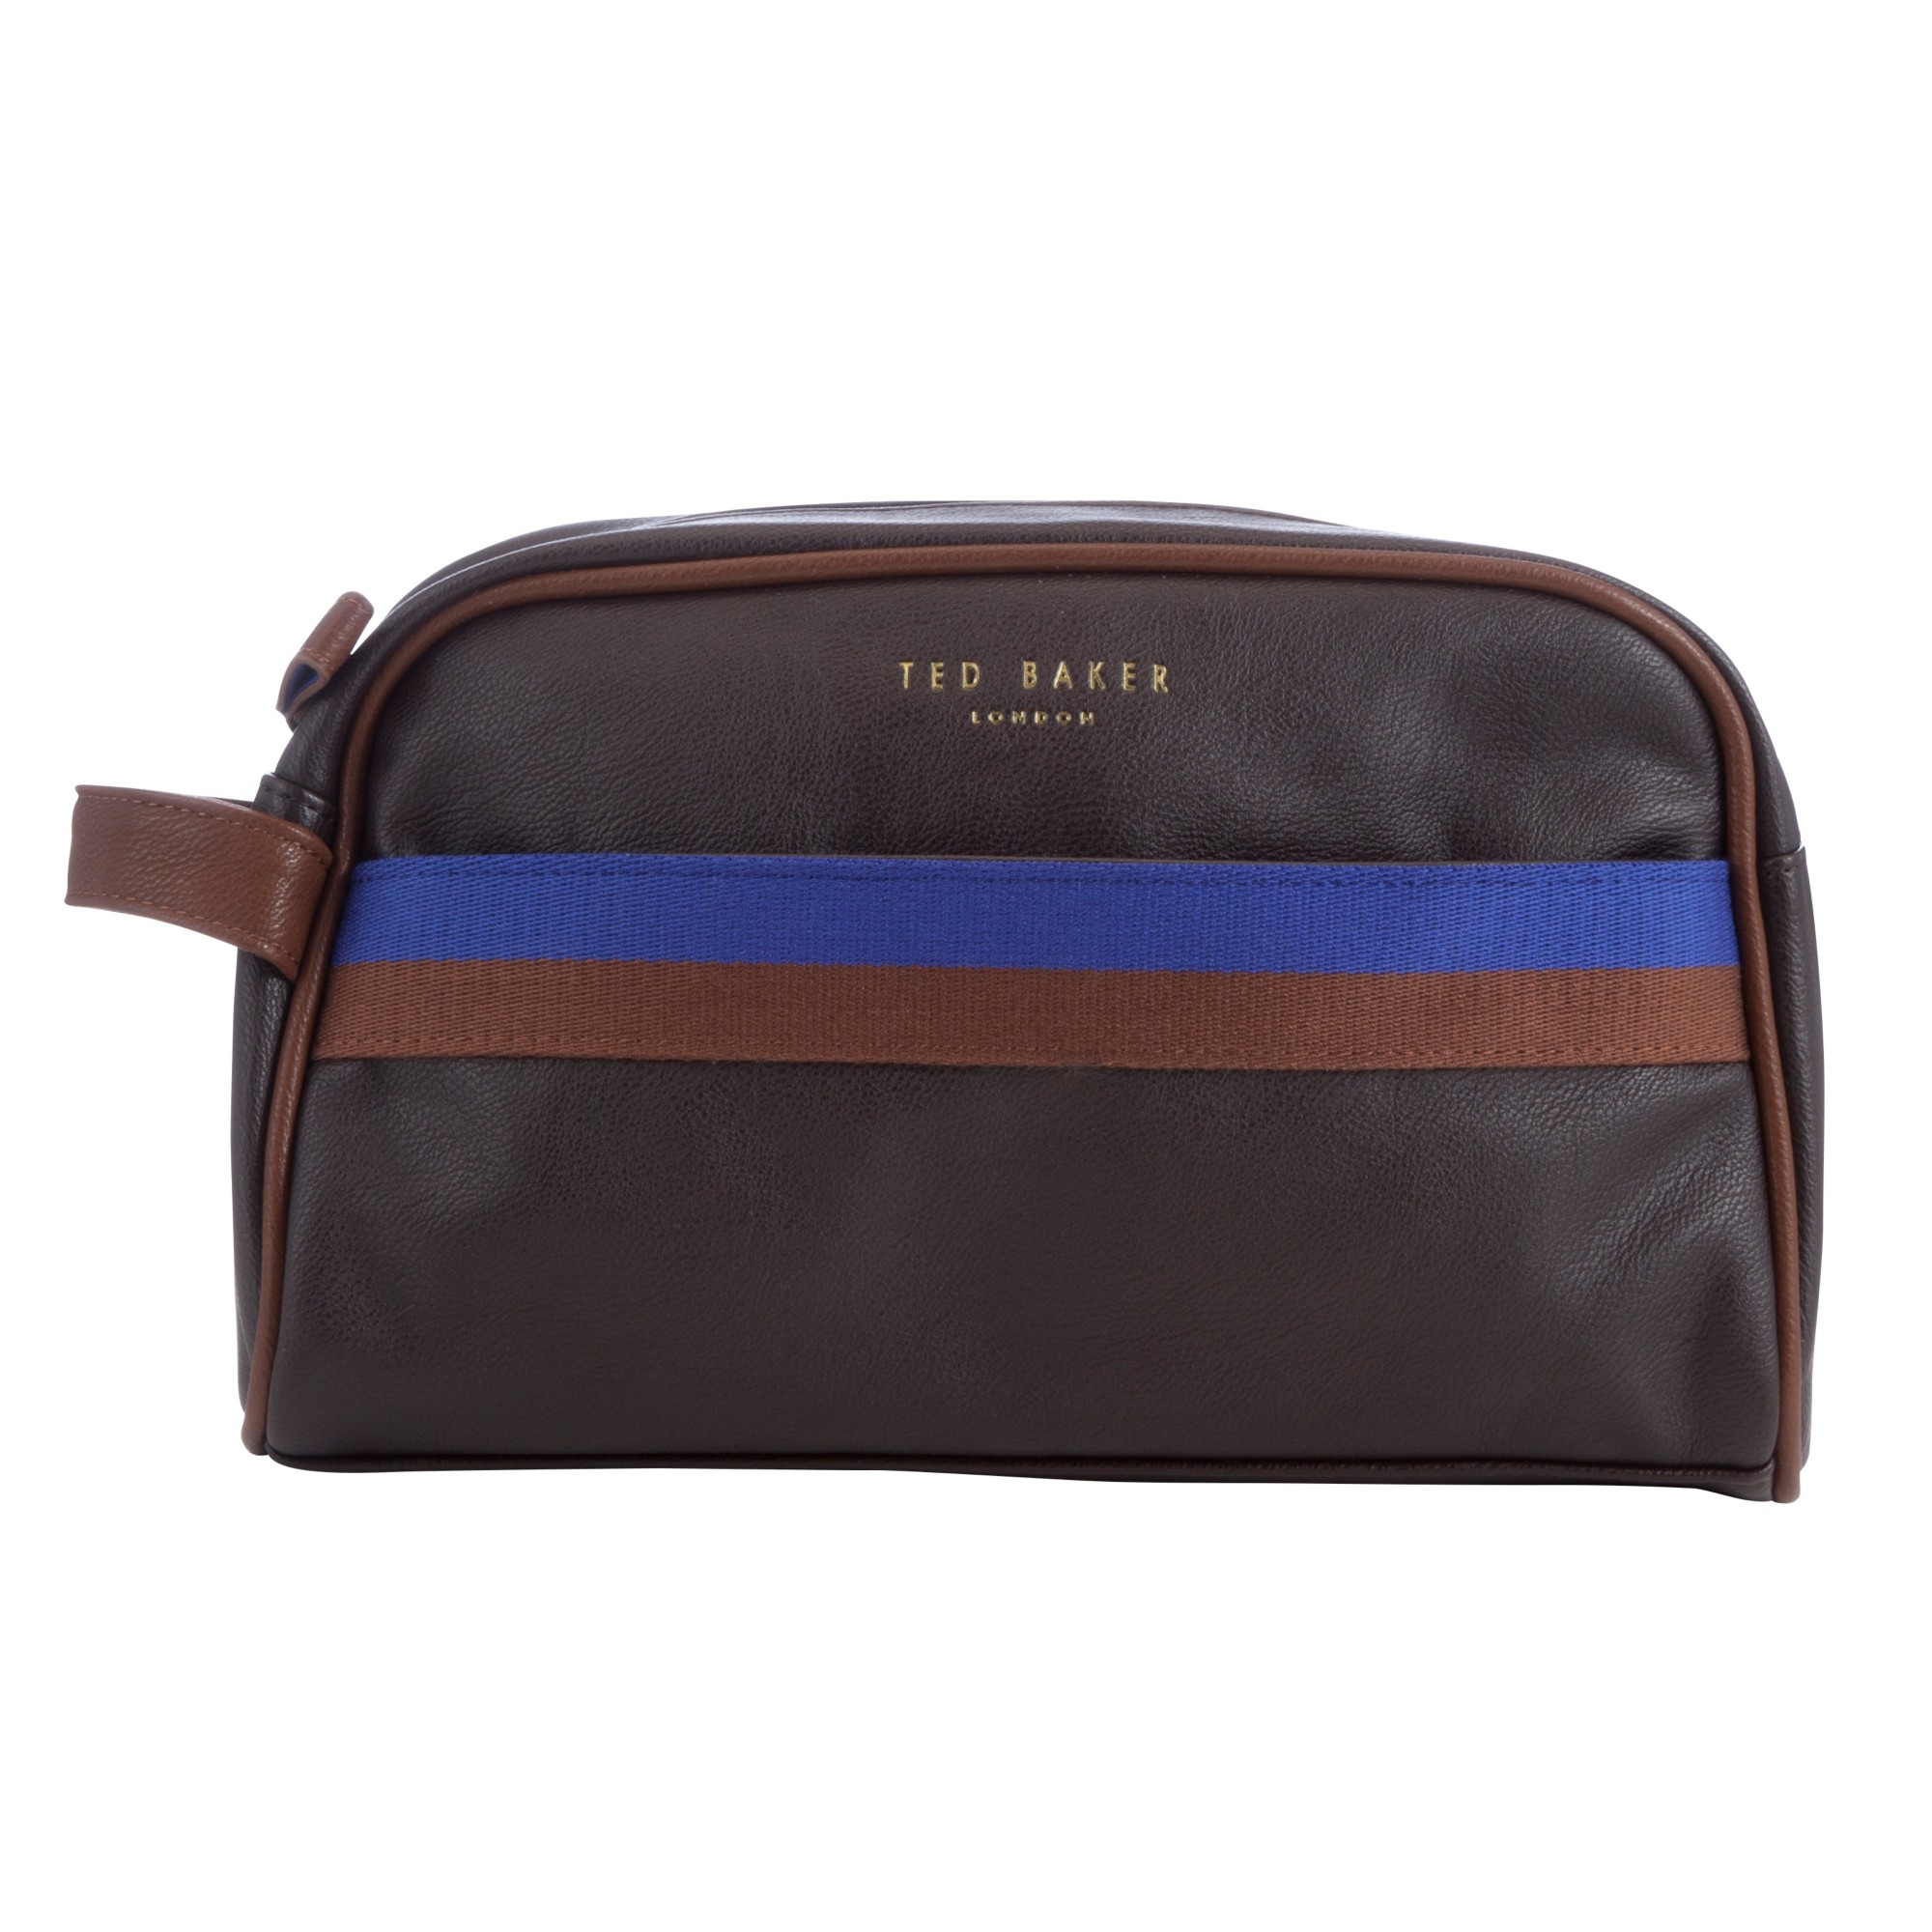 Ted Baker Cleanit Core Webbing Wash Bag in Chocolate (Brown) for Men - Lyst